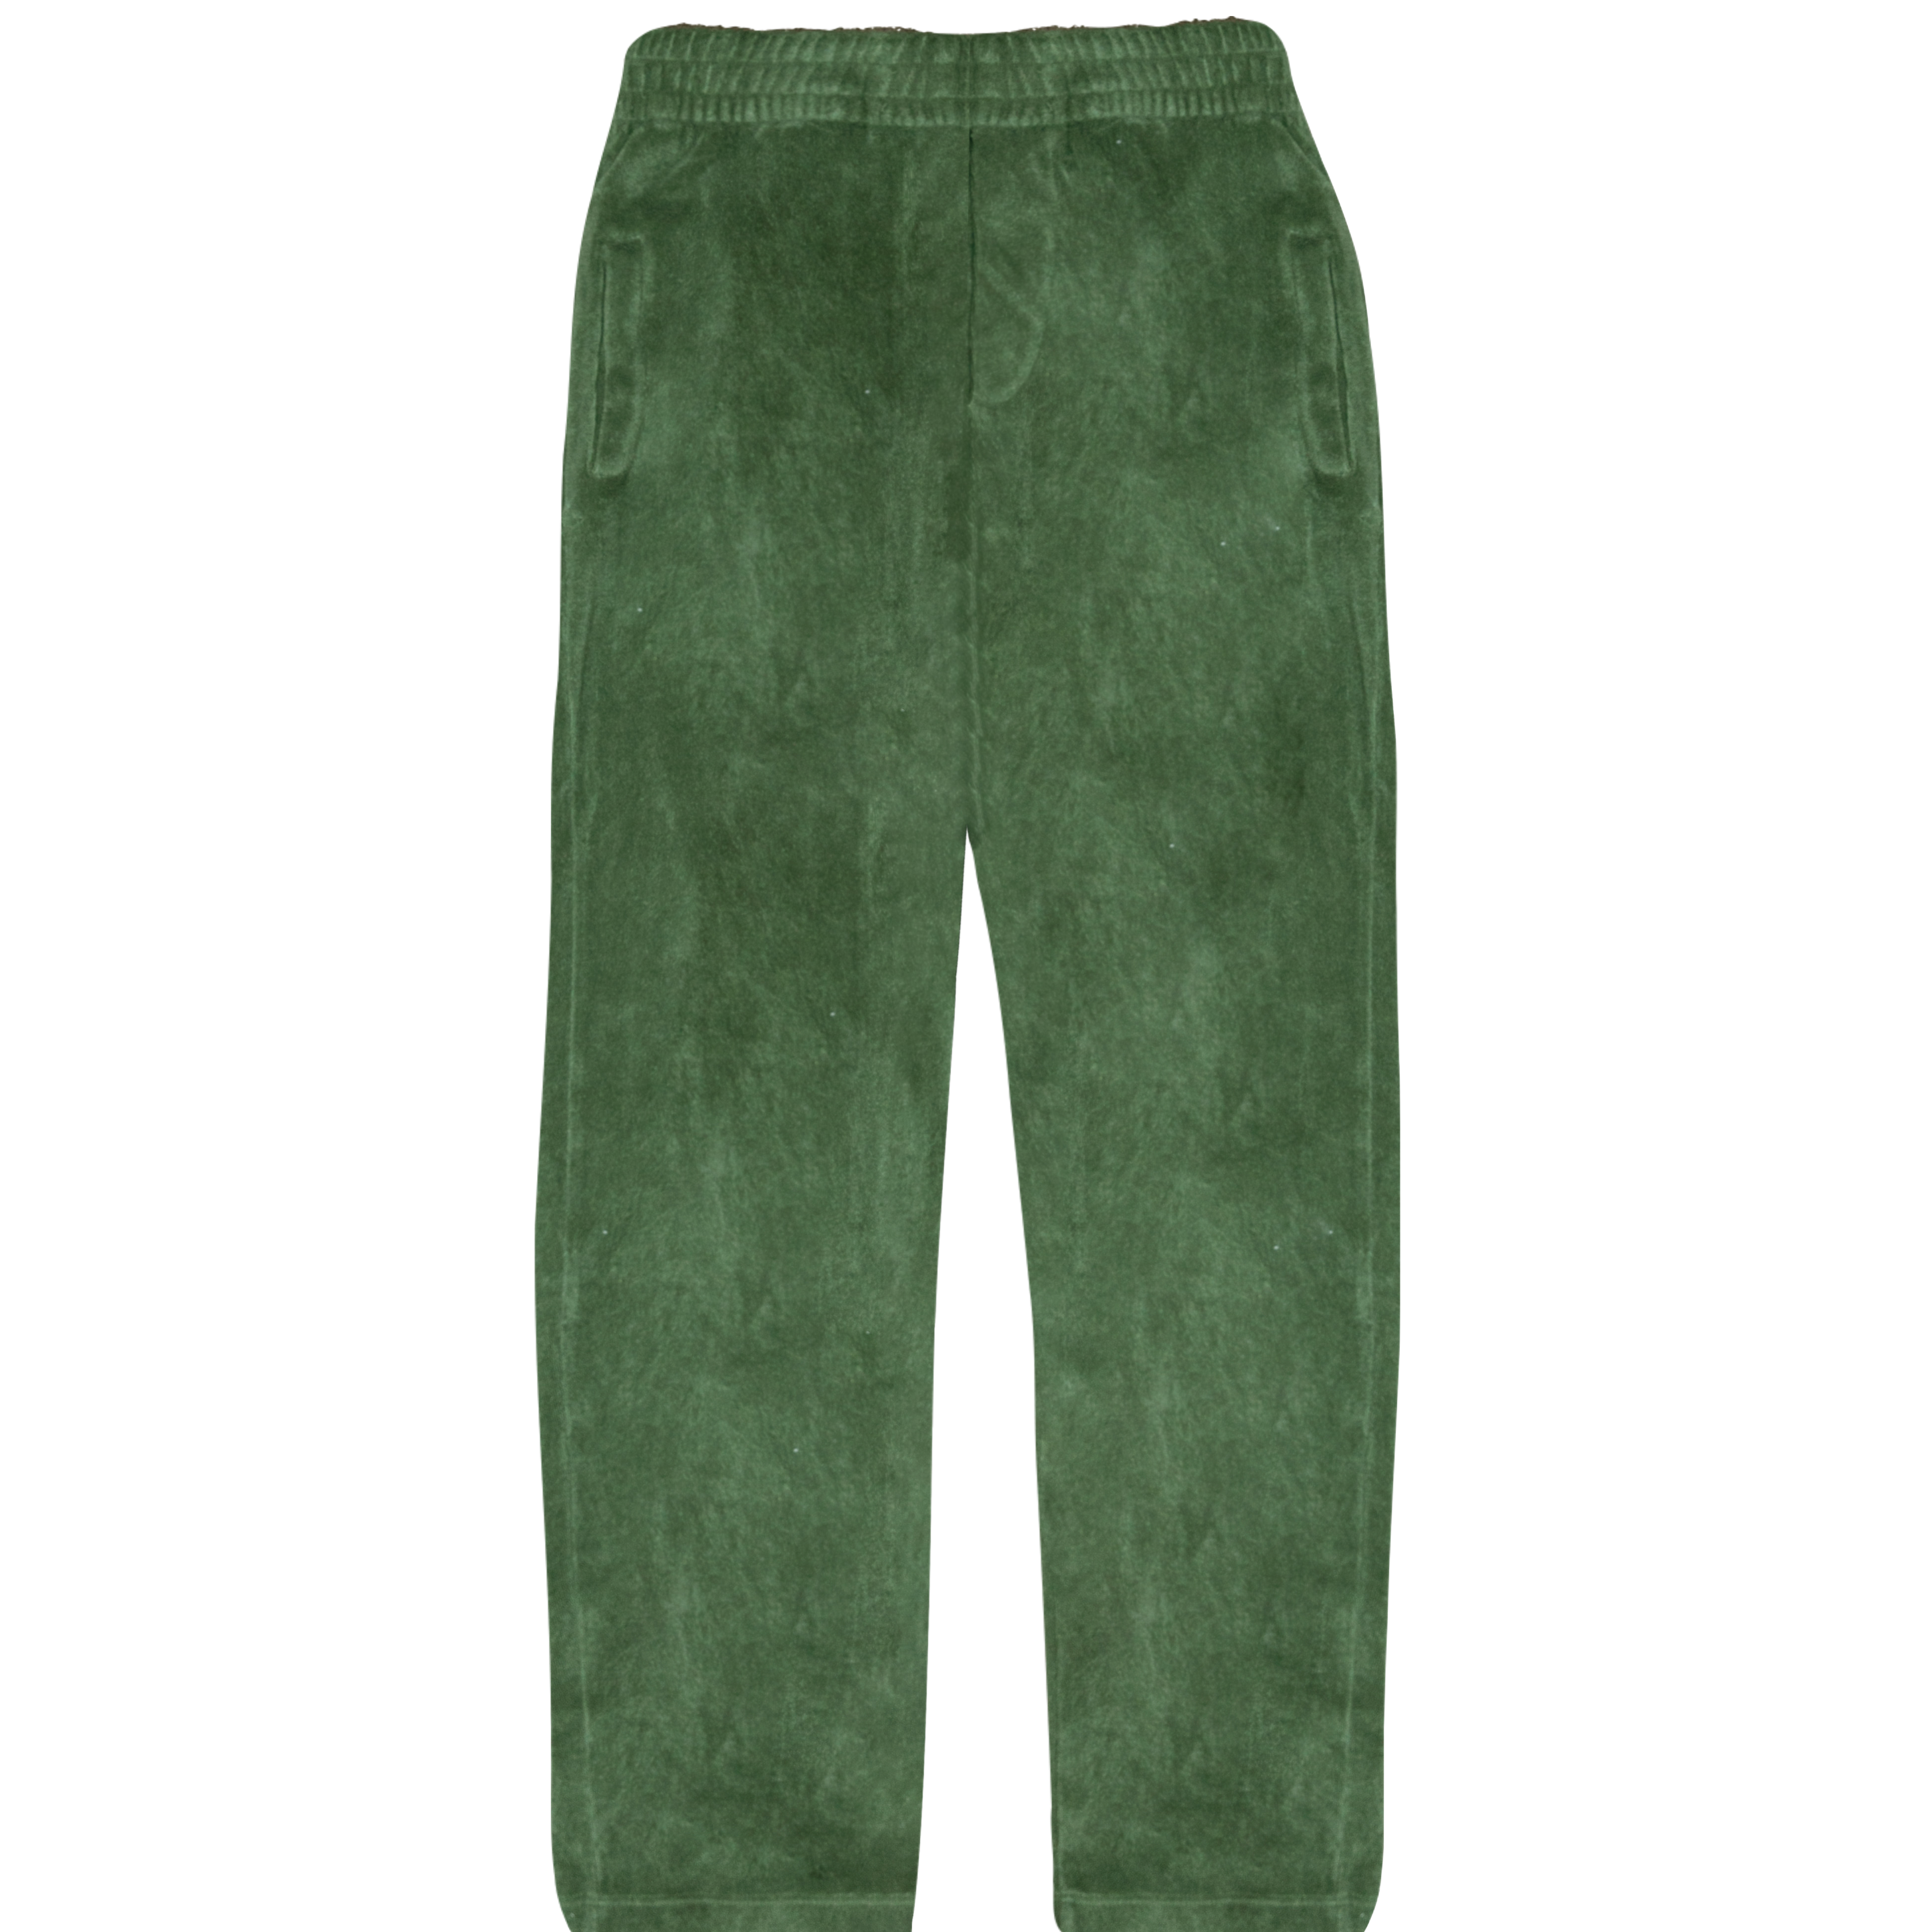 THE TROUSDALE TROUSER